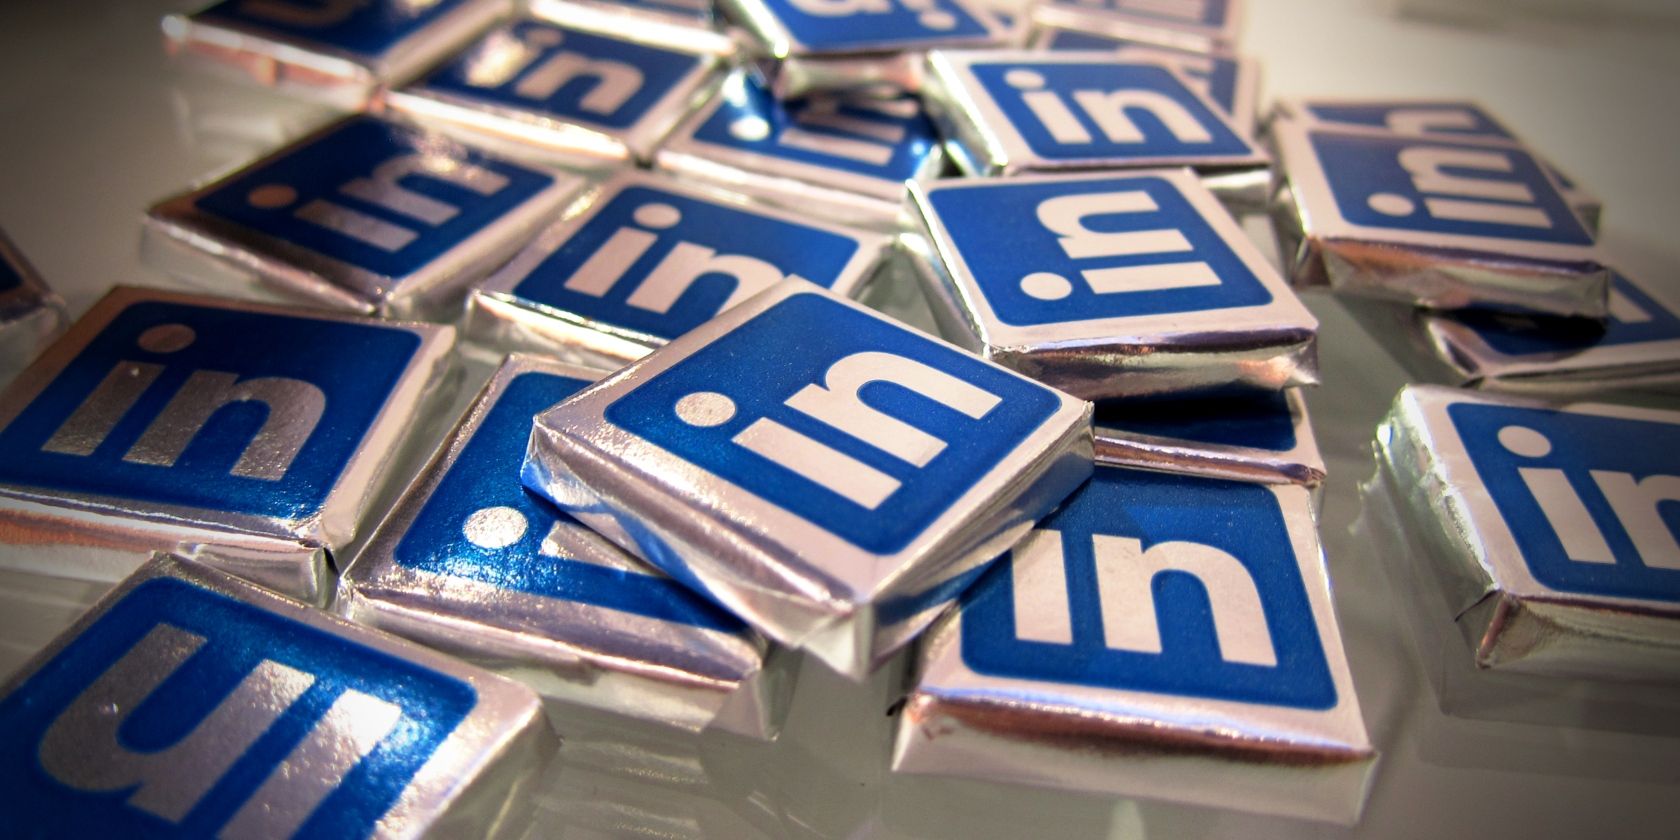 How to Help Others Pronounce Your Name Correctly on LinkedIn